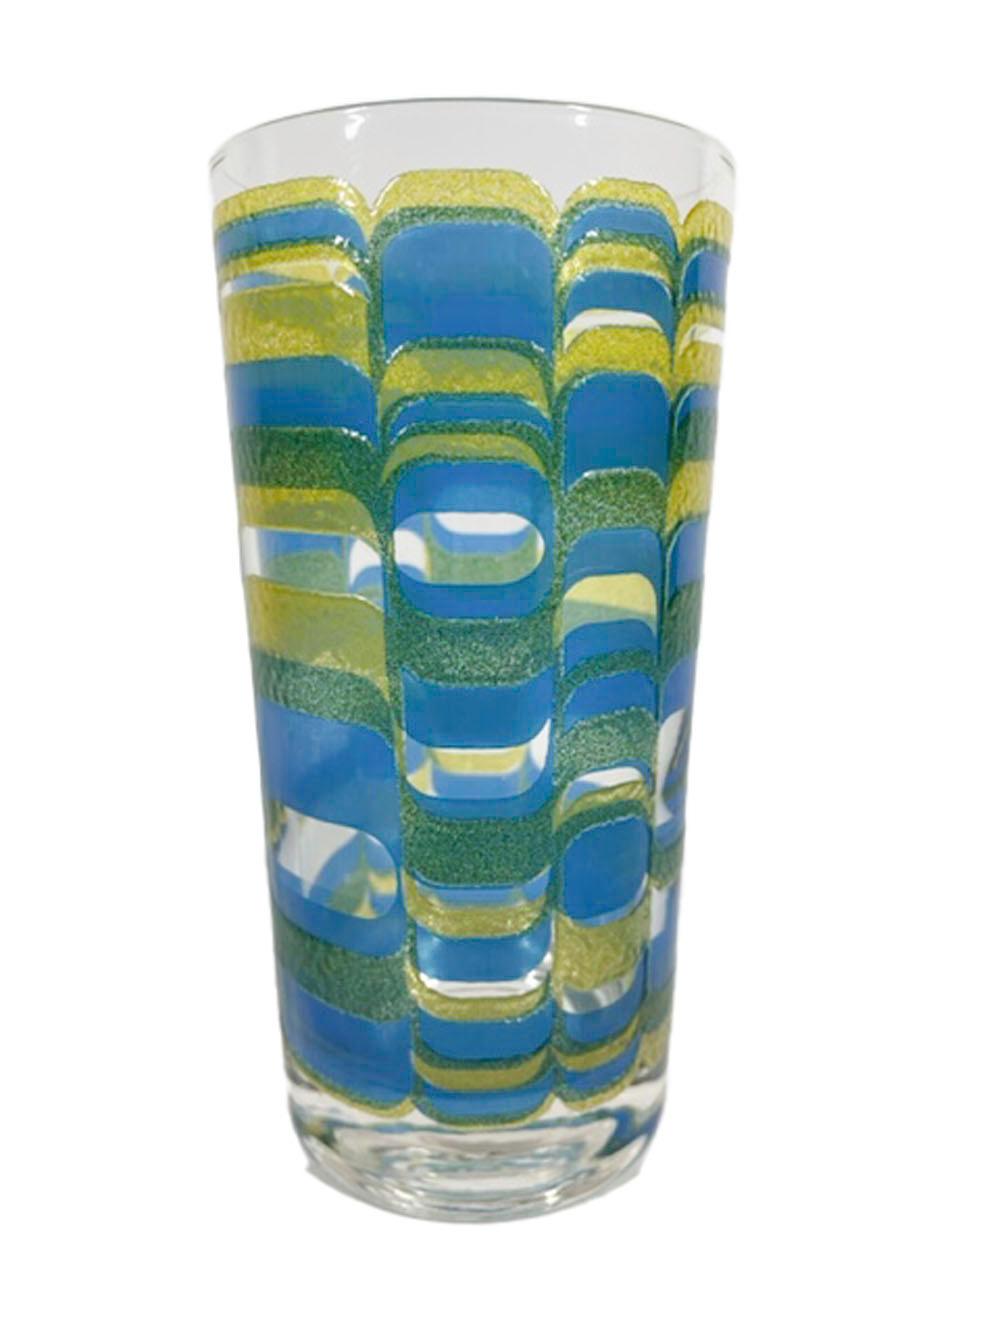 Mid-Century Modern Vintage Highball Glasses in Blue and Yellow Translucent Enamels by Pasinski